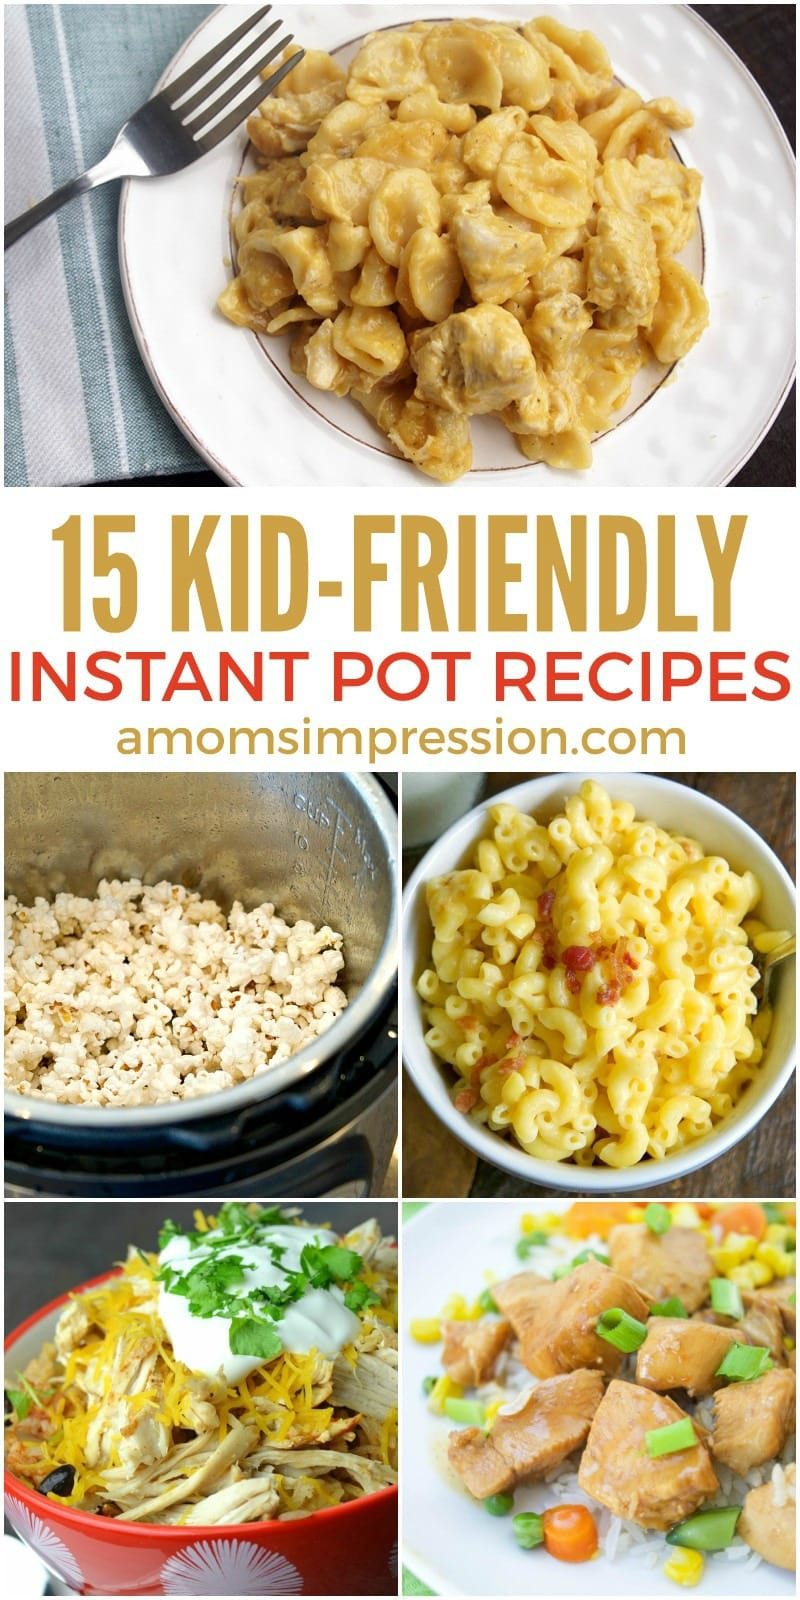 Quick Easy Kid Friendly Dinners
 15 Quick and Easy Kid Friendly Instant Pot Recipes